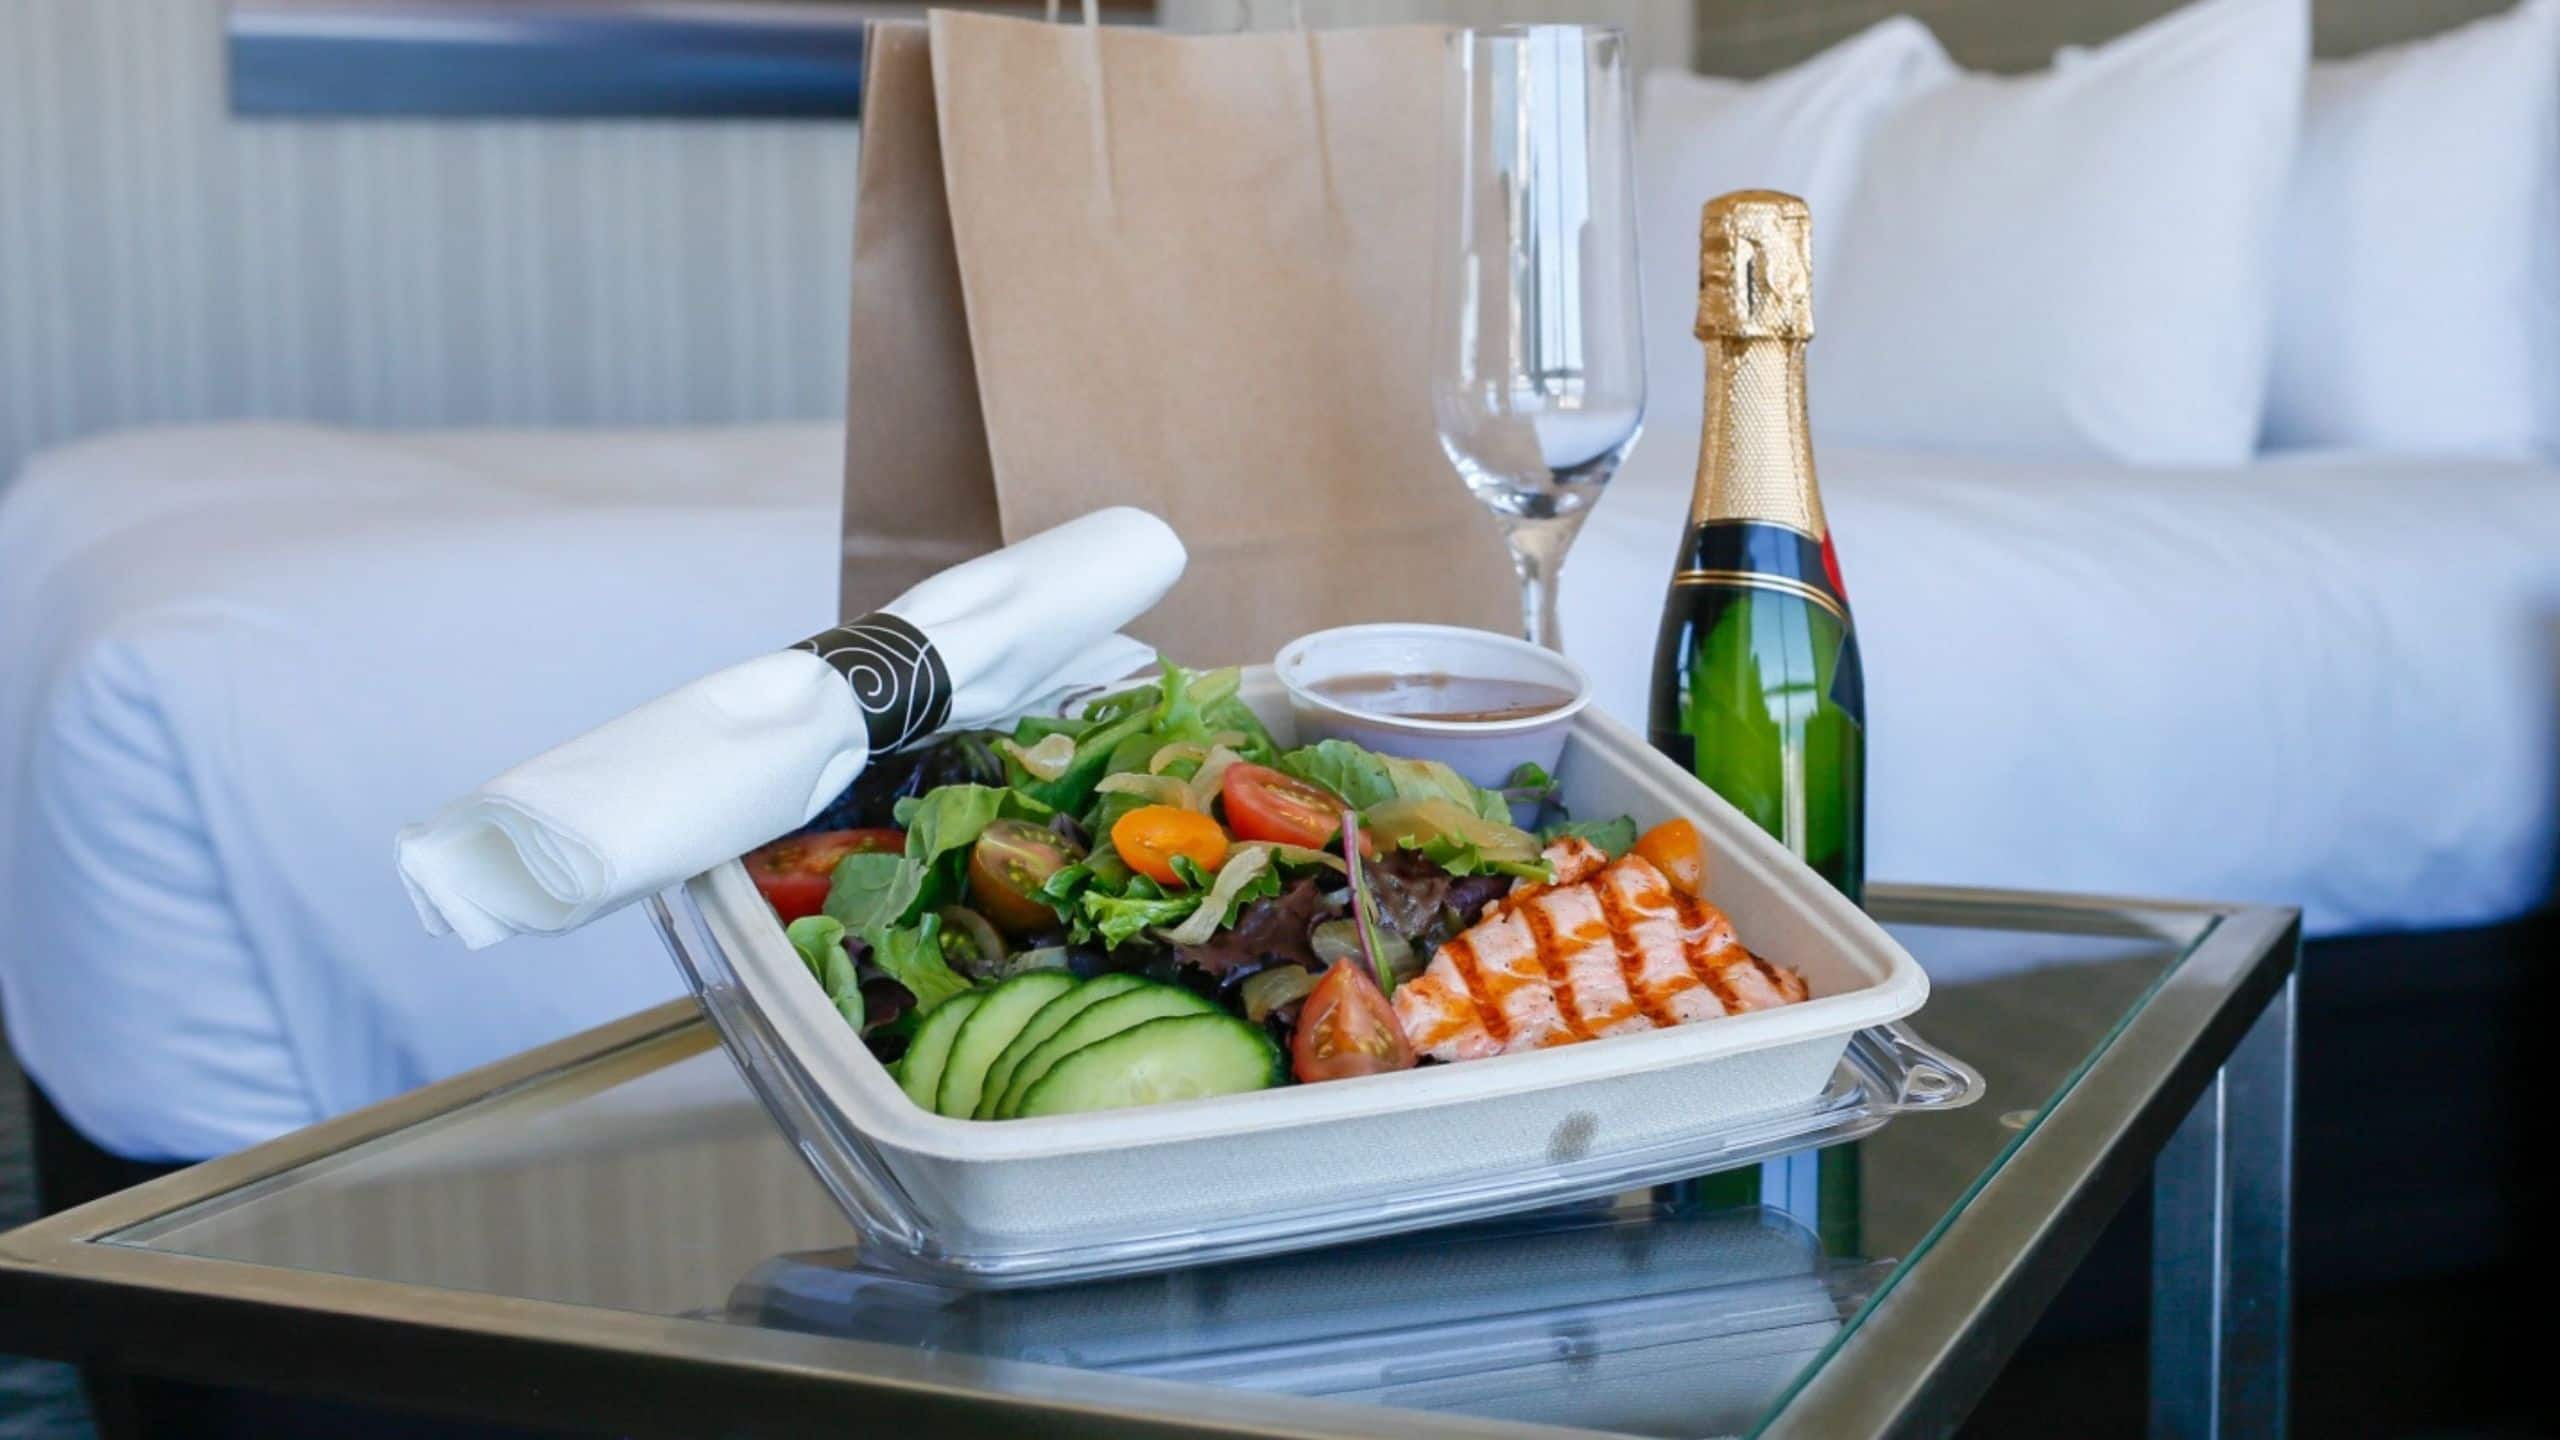 Manchester Grand Hyatt San Diego In Room Dining Salmon Salad With Champagne